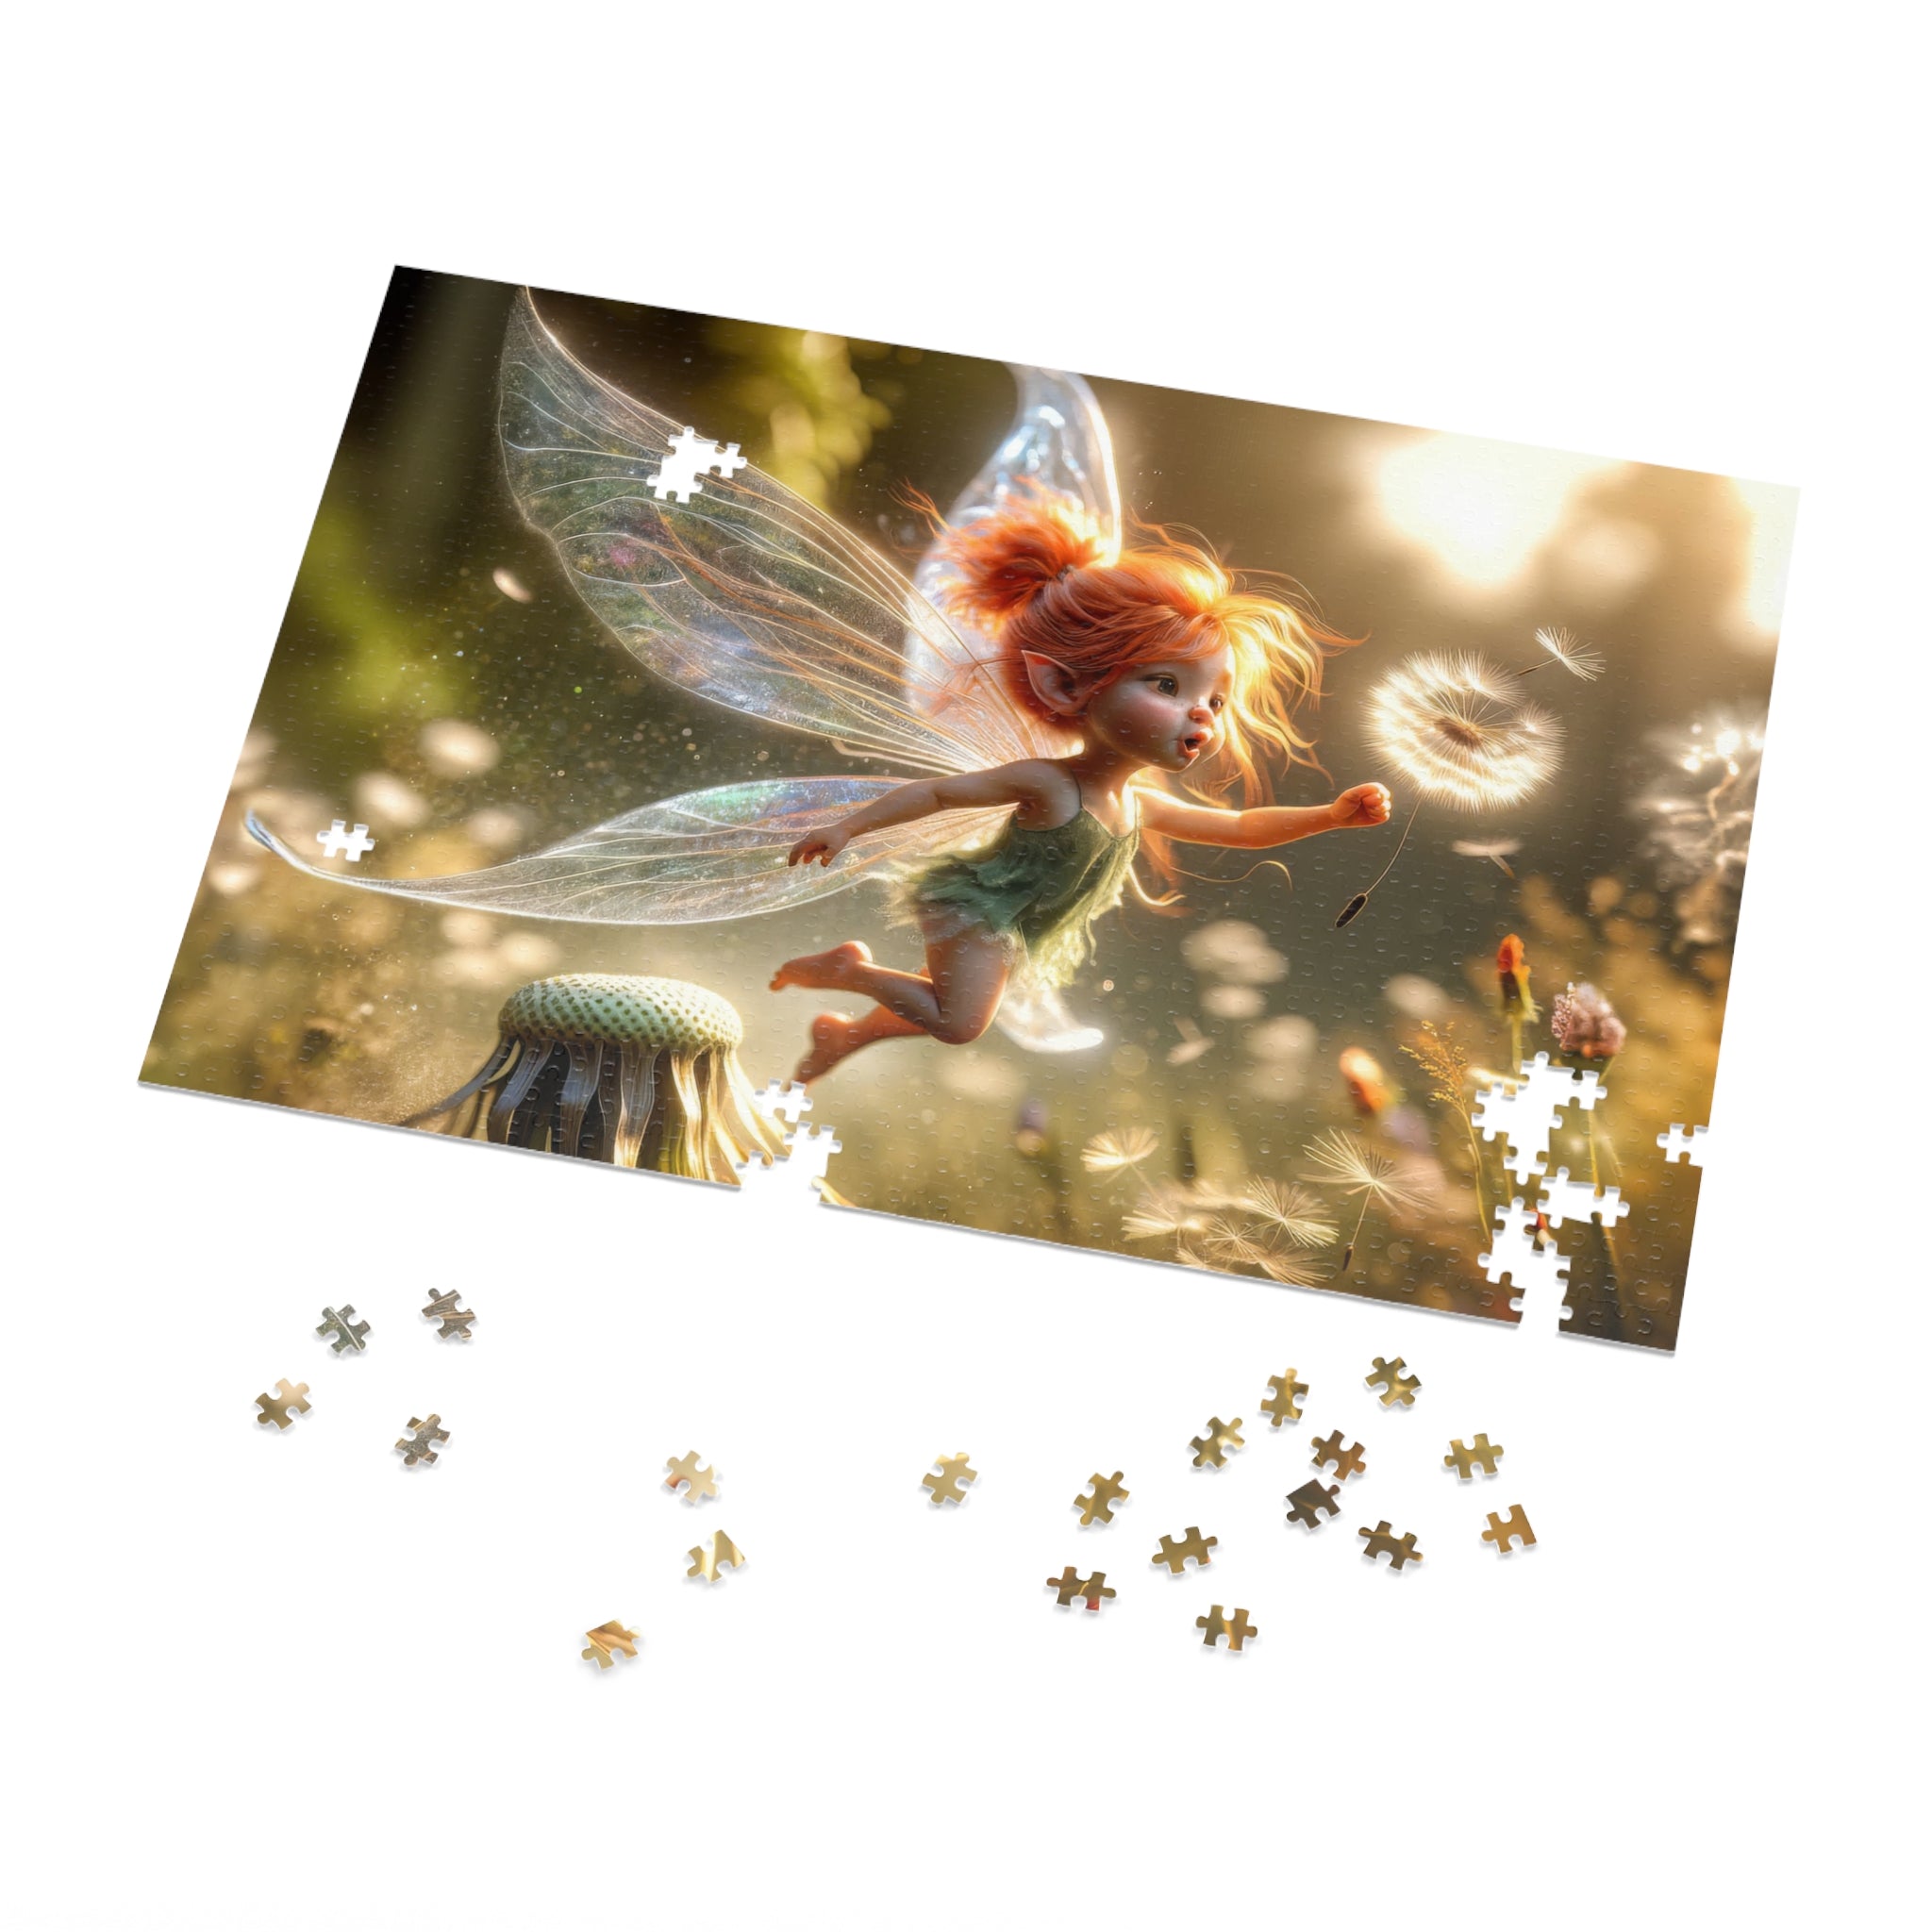 The Delicate Dance of the Dandelion Fae Jigsaw Puzzle